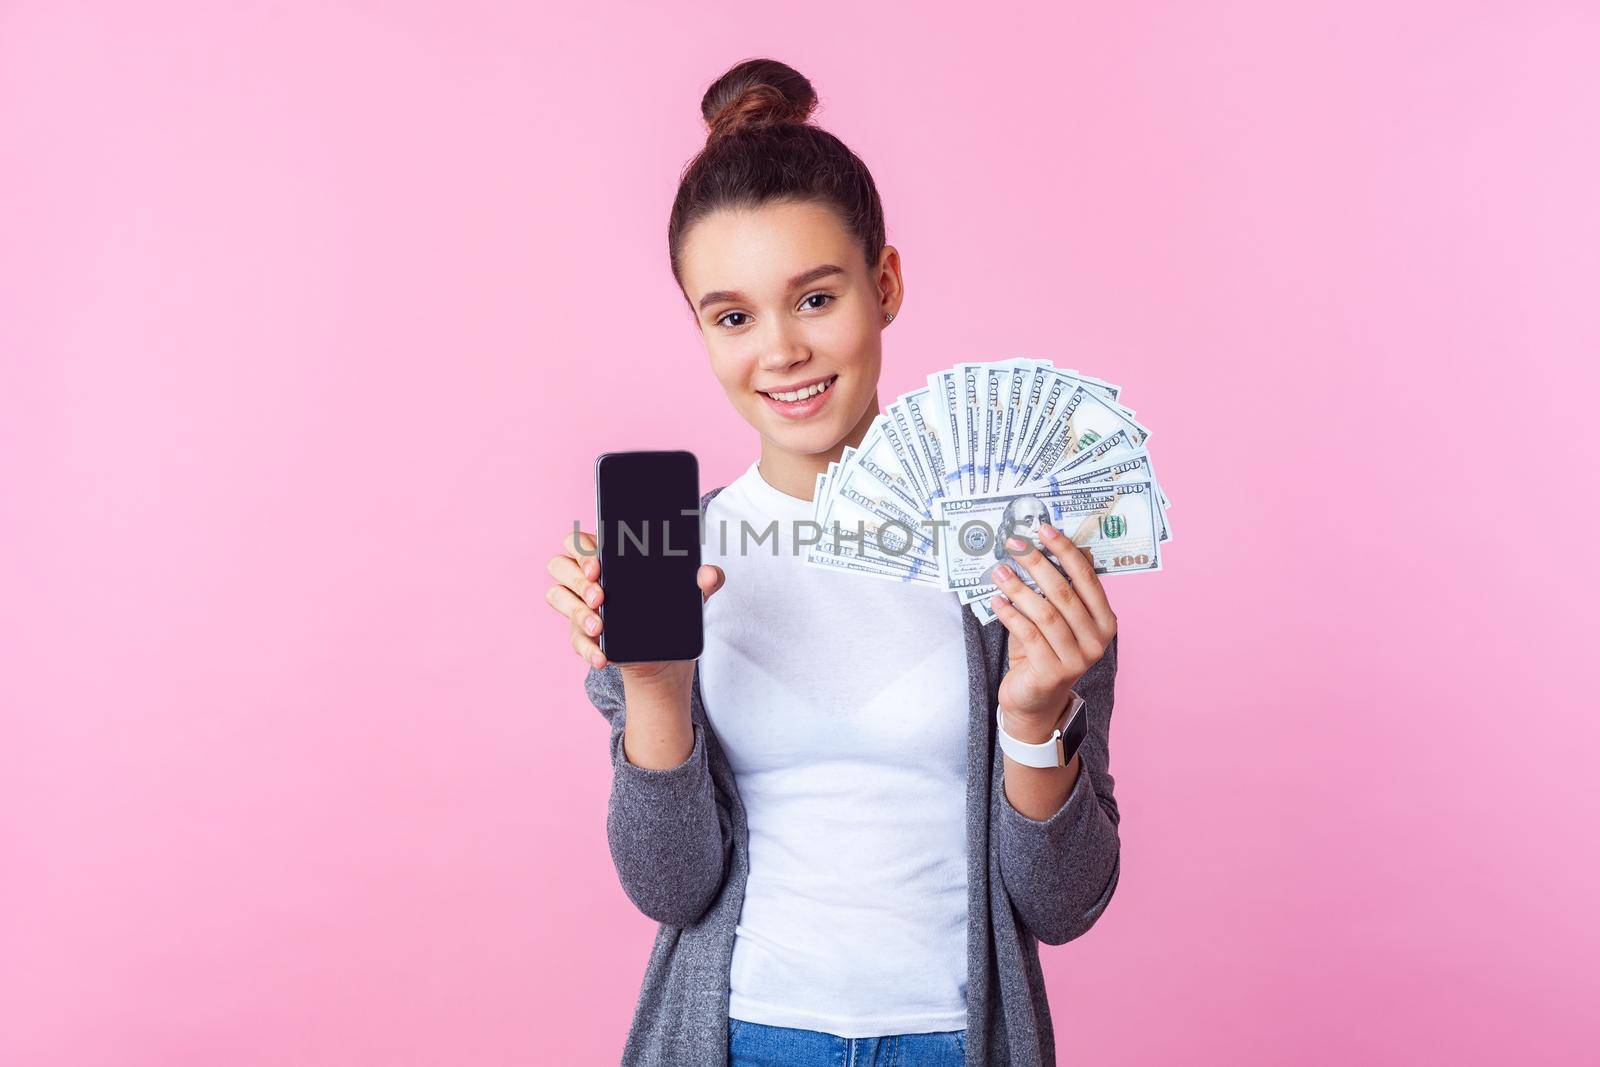 Mobile banking apps. Portrait of beautiful brunette teen girl with bun hairstyle in casual clothes showing cell phone and dollars, smiling at camera. indoor studio shot isolated on pink background